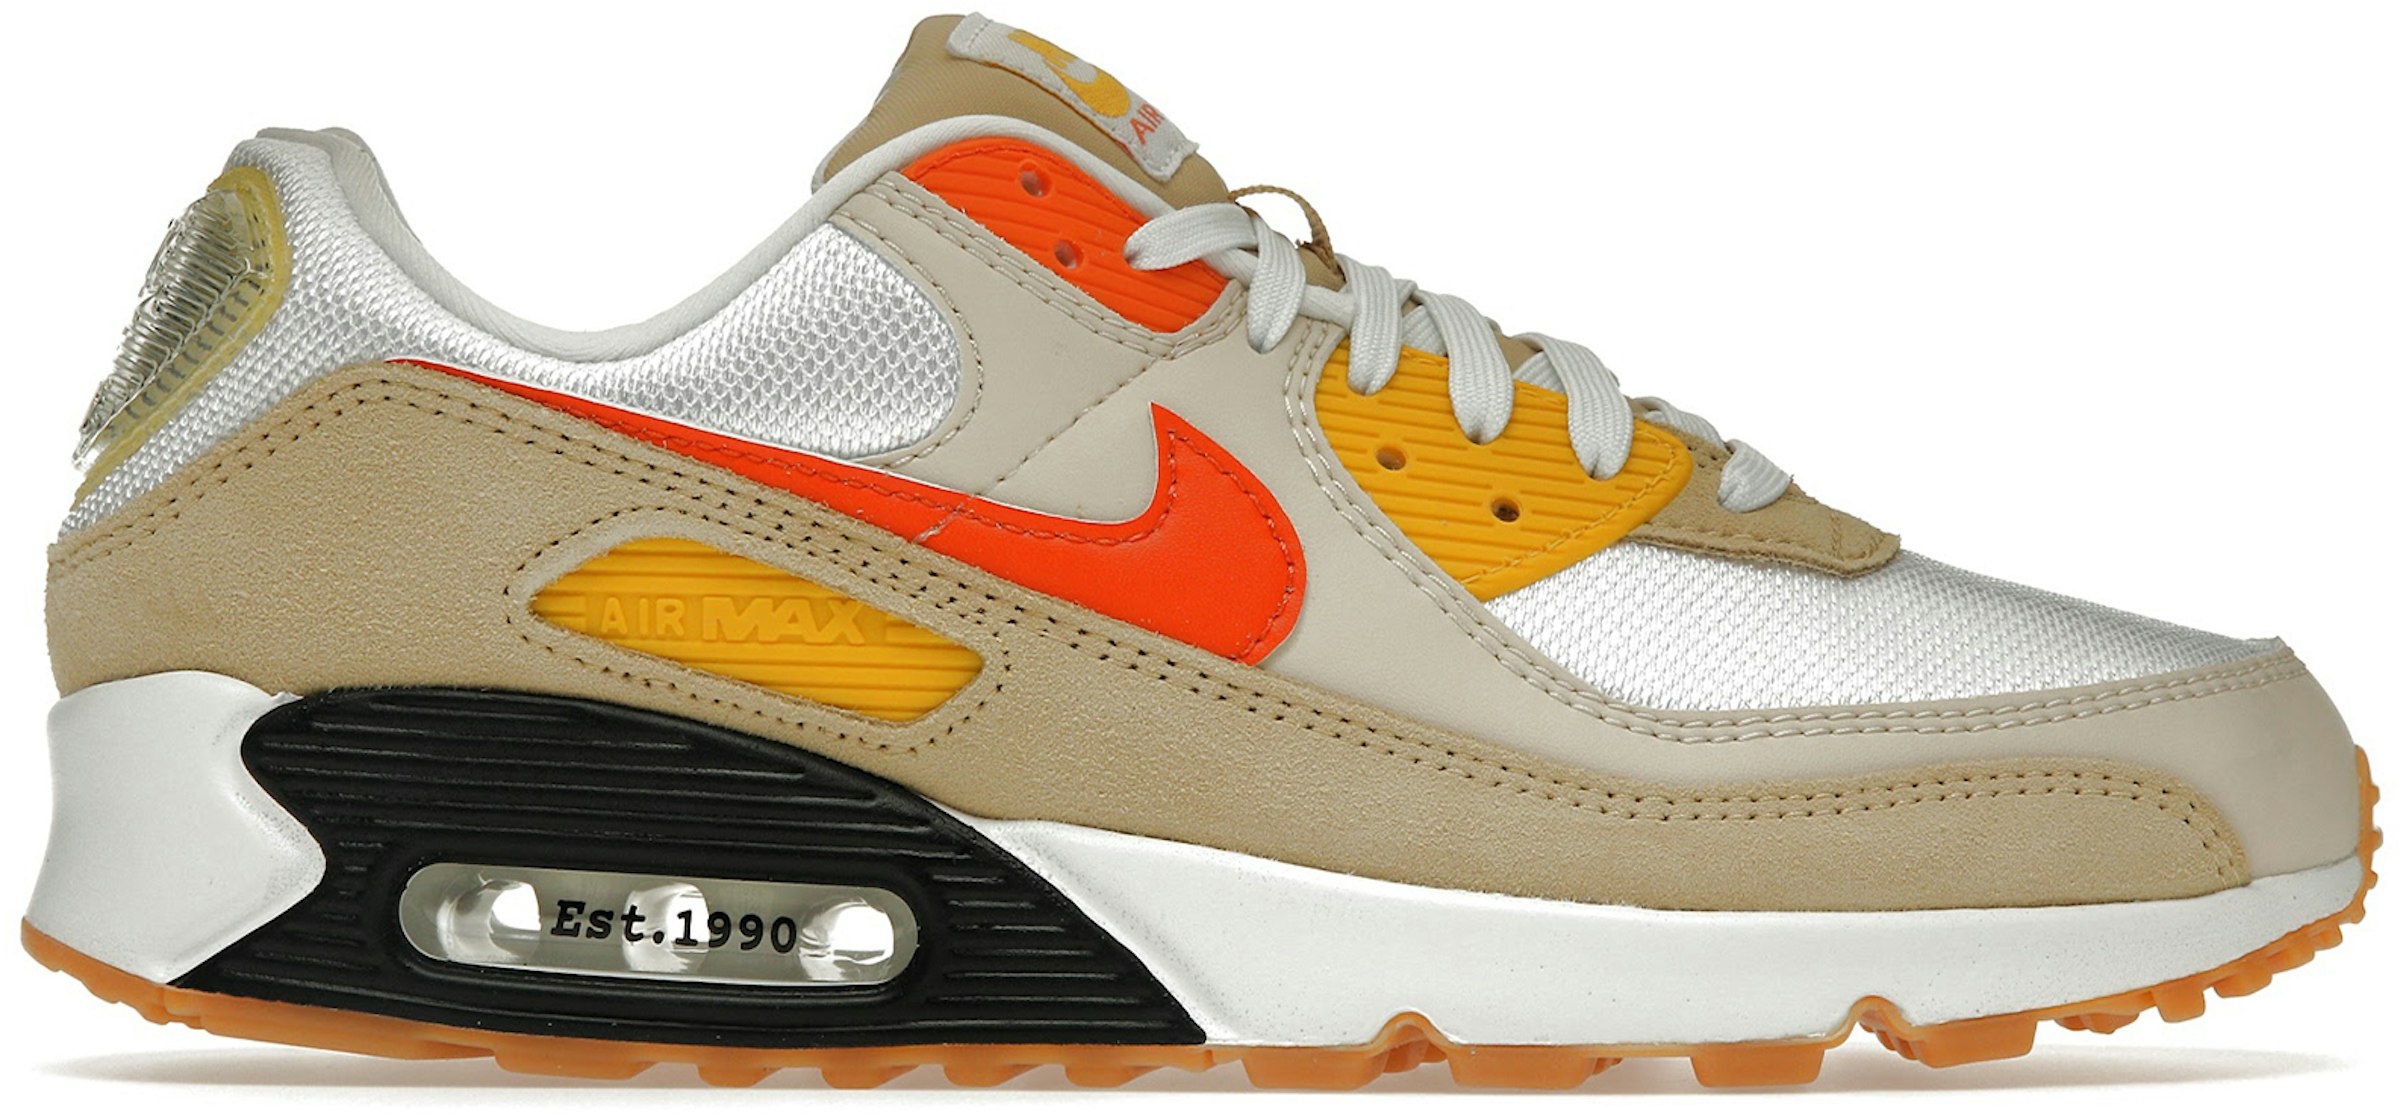 Air Max - All Sizes & Colorways at